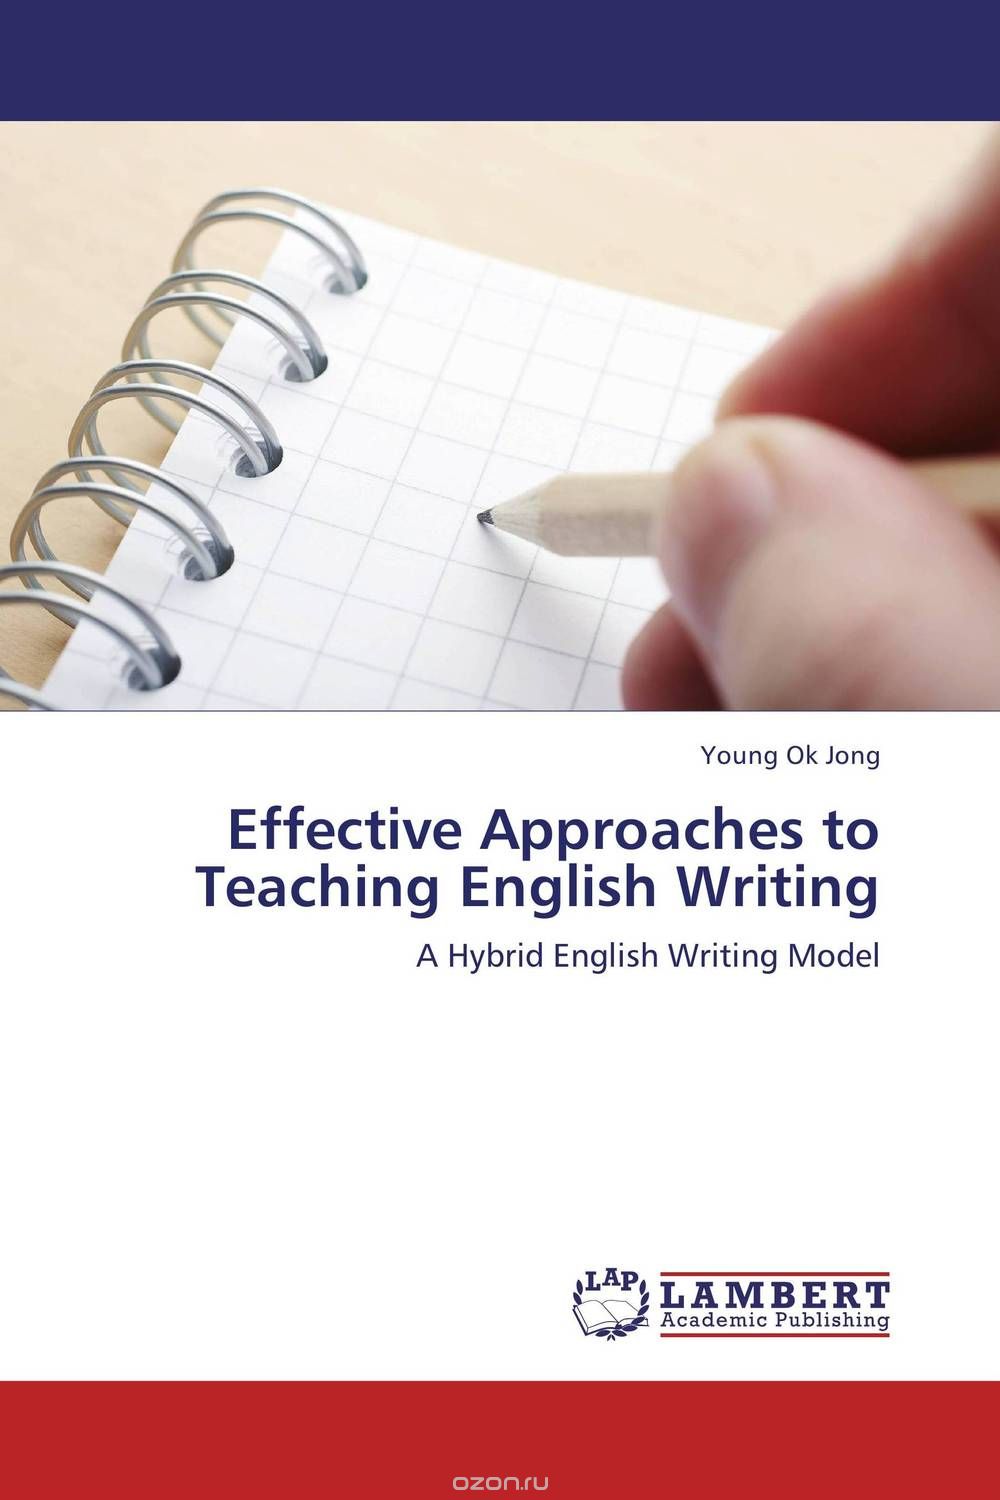 Effective Approaches to Teaching English Writing